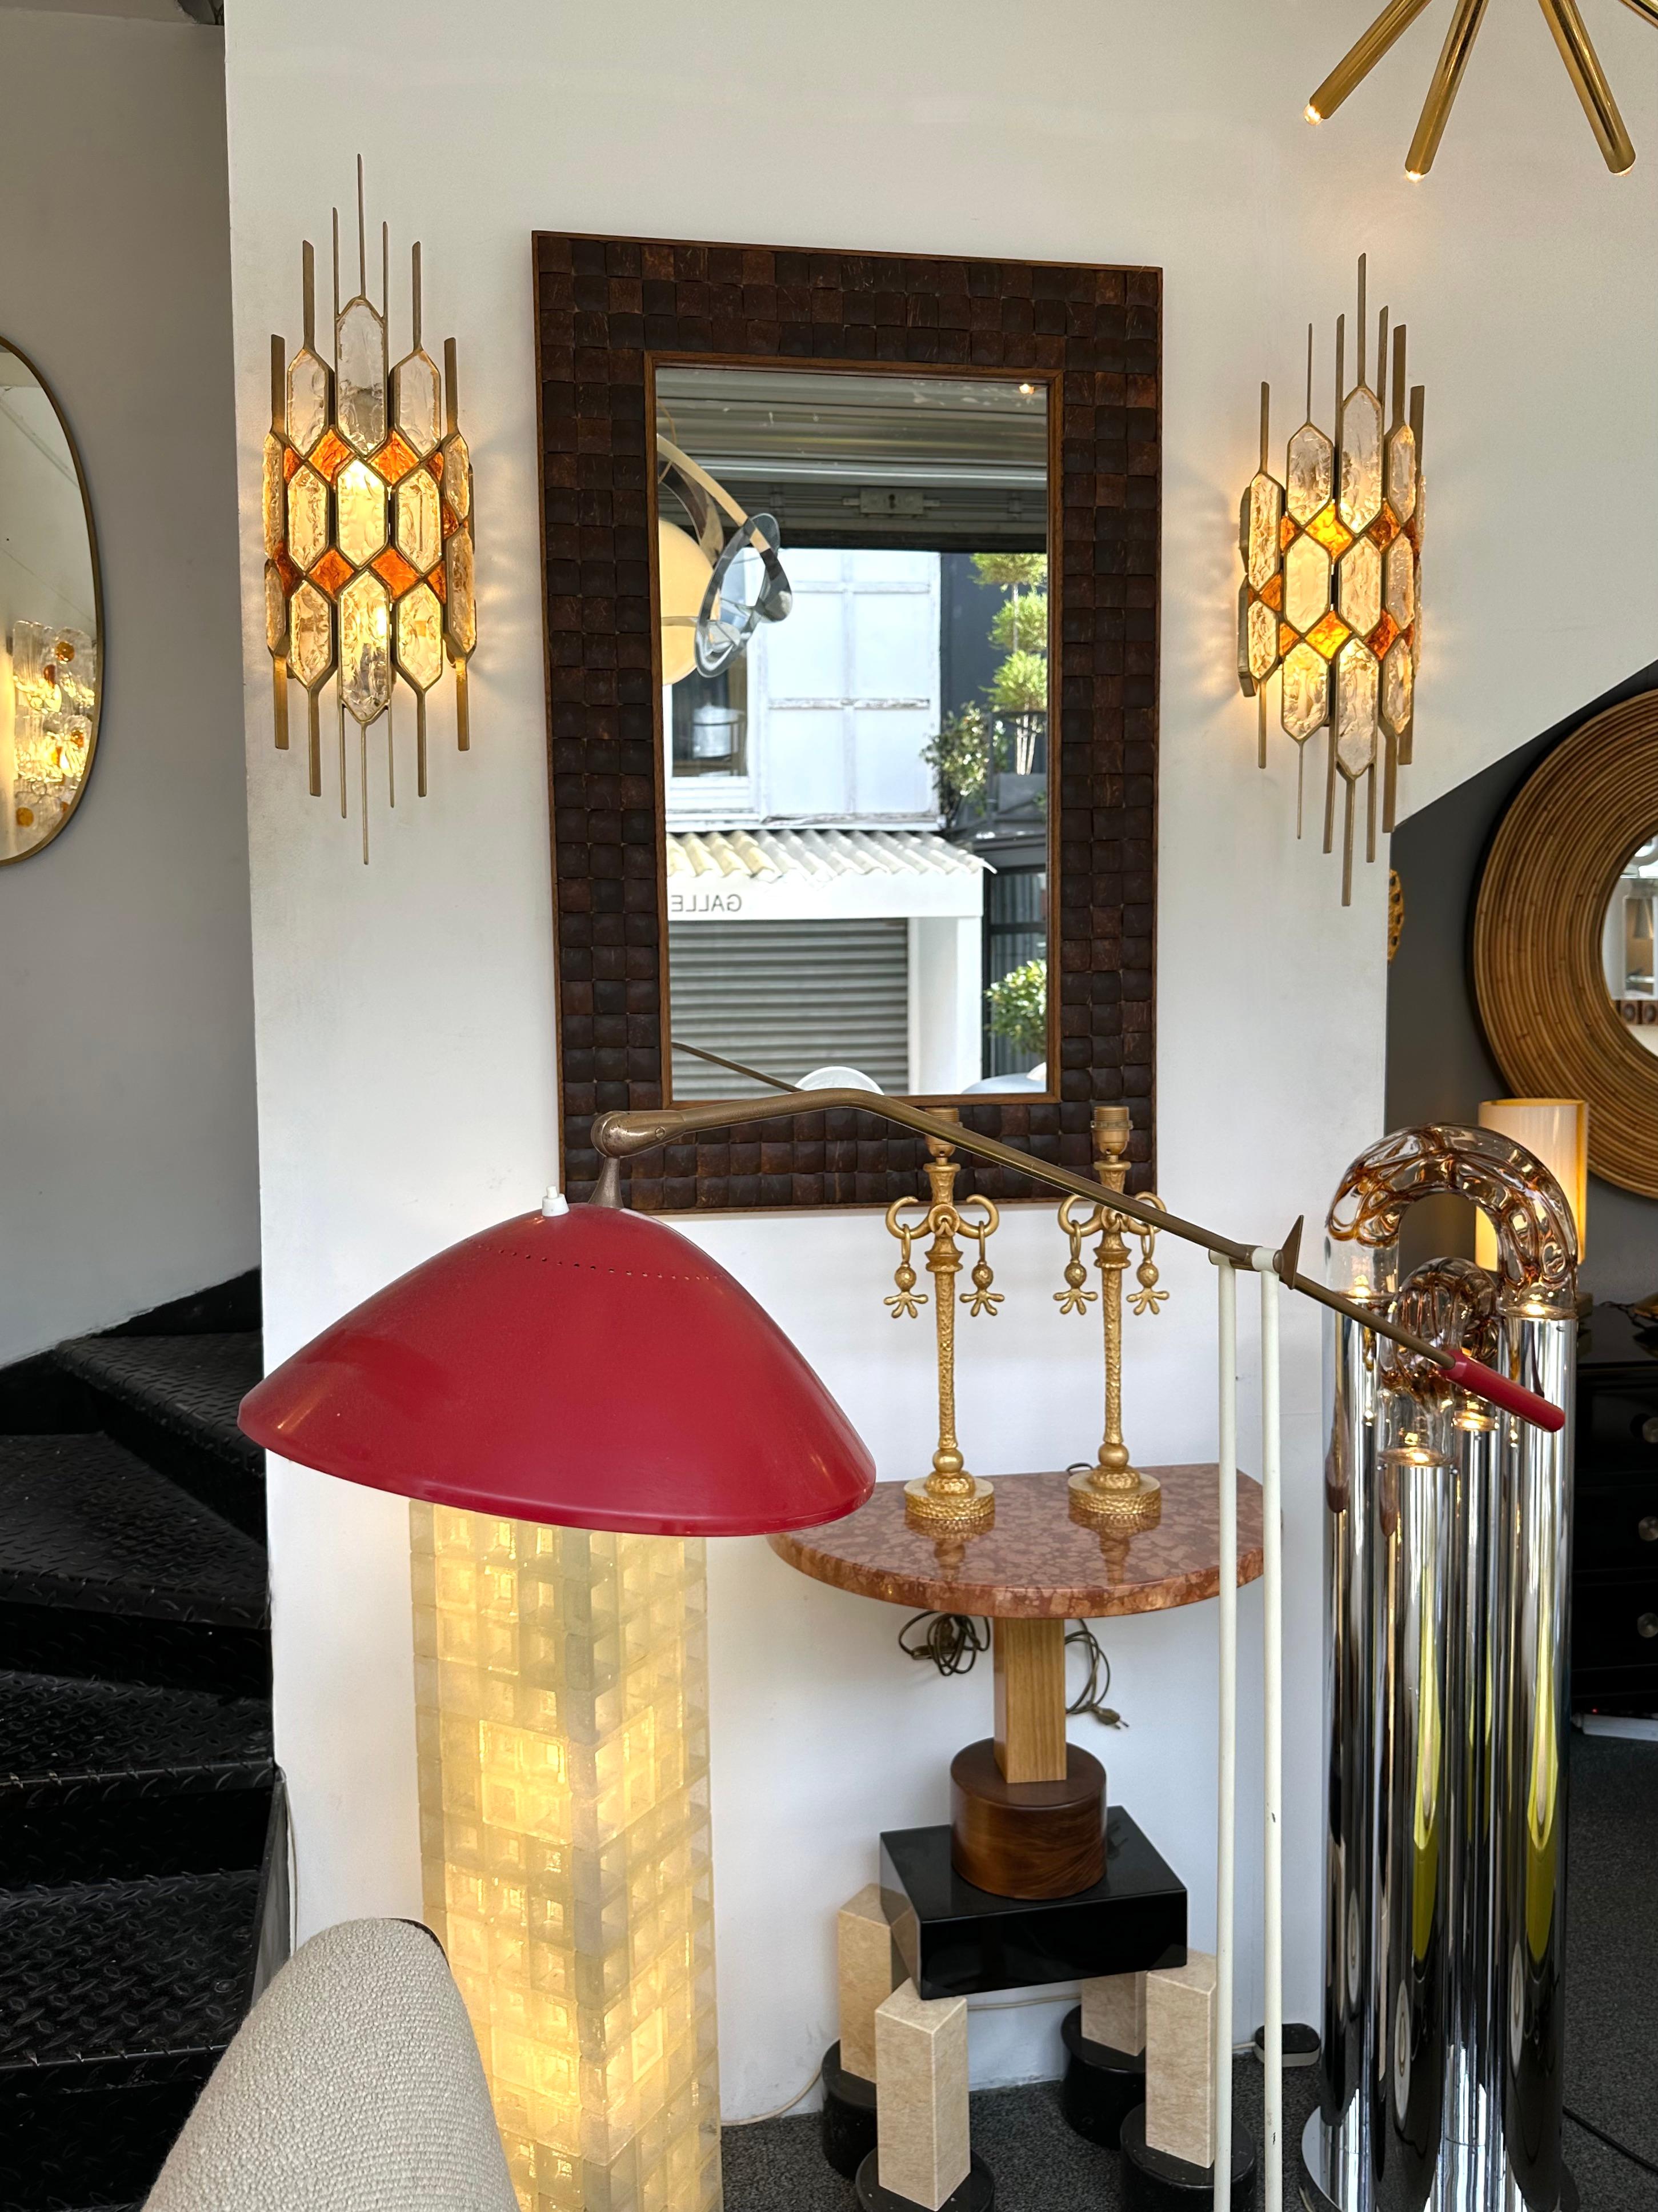 Large Mid-Century Modern pair of wall lamps lights lightning sconces hammered glass and wrought iron, gilding gilt gold patina, by the manufacture Longobard in Verona in a Brutalist style, the concurrent of Biancardi Jordan Arte and Poliarte during